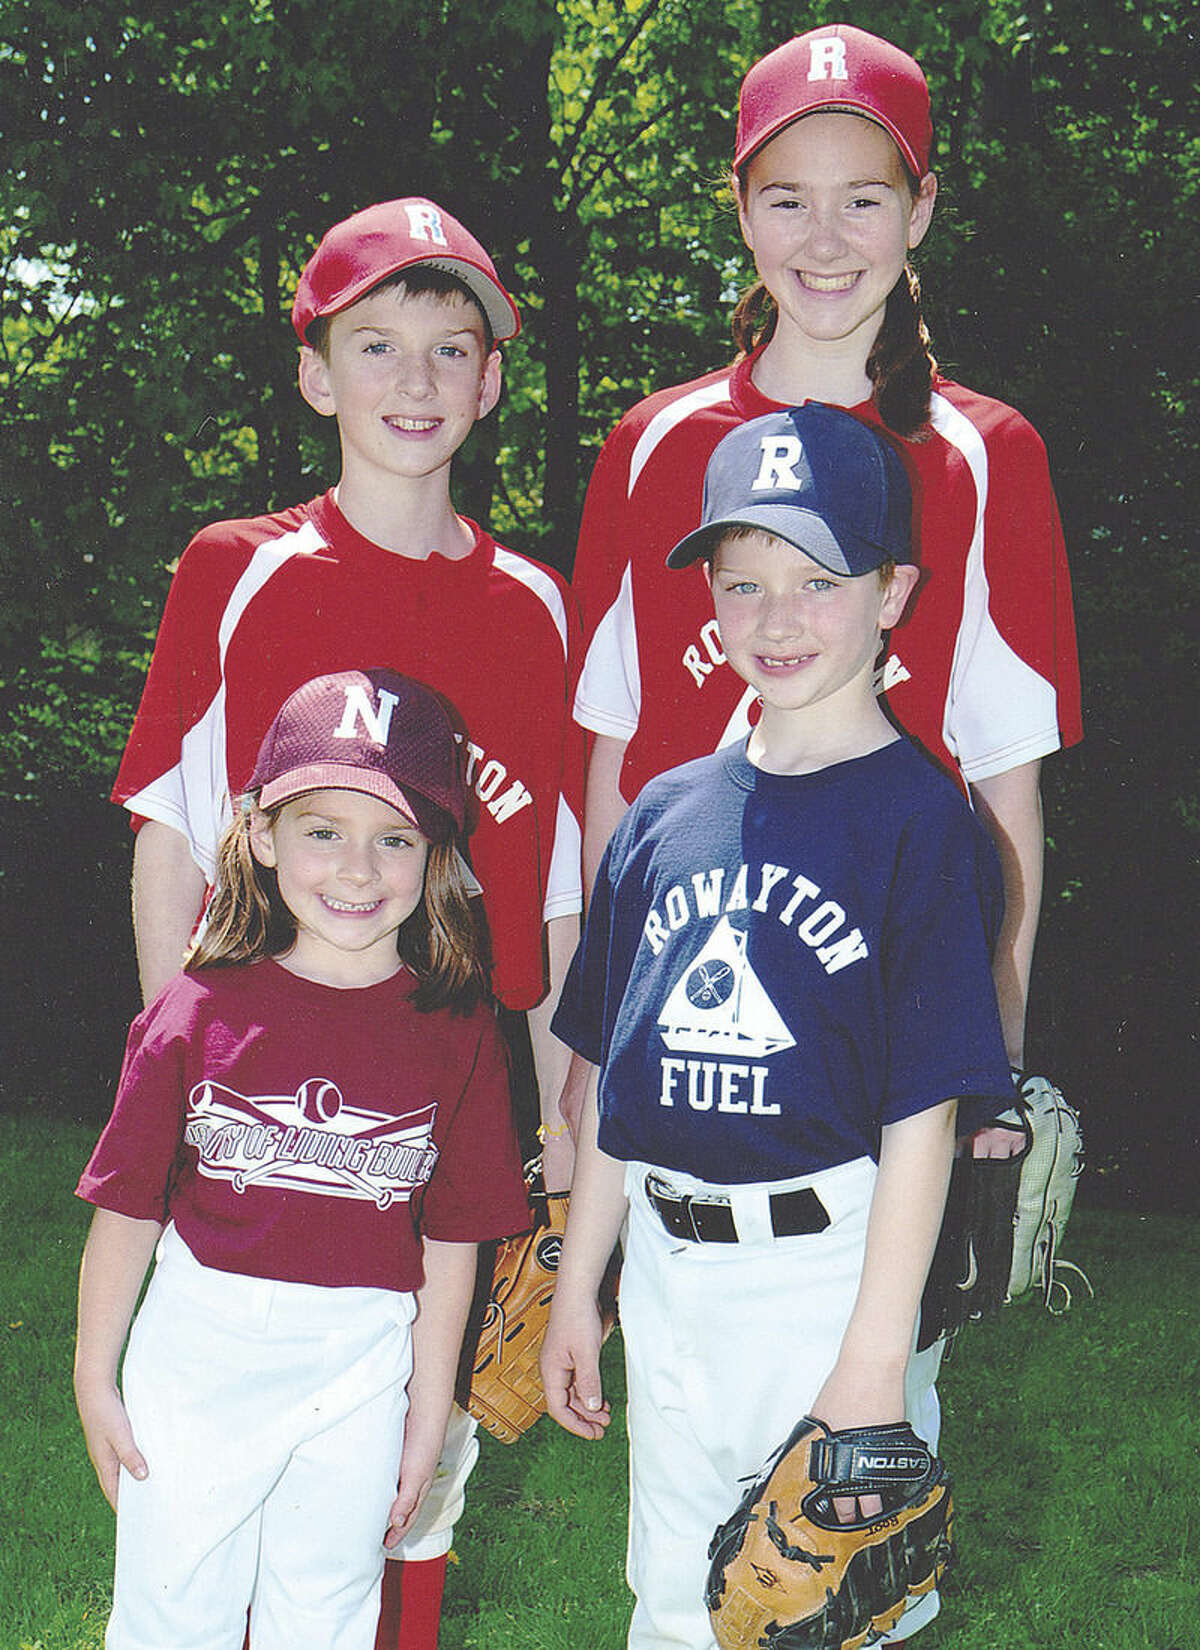 Contributed Photo The Root's Griffin, top left, Megan, top right, Lindsay, bottom left and Kyle pose together in their baseball uniforms in 2010.